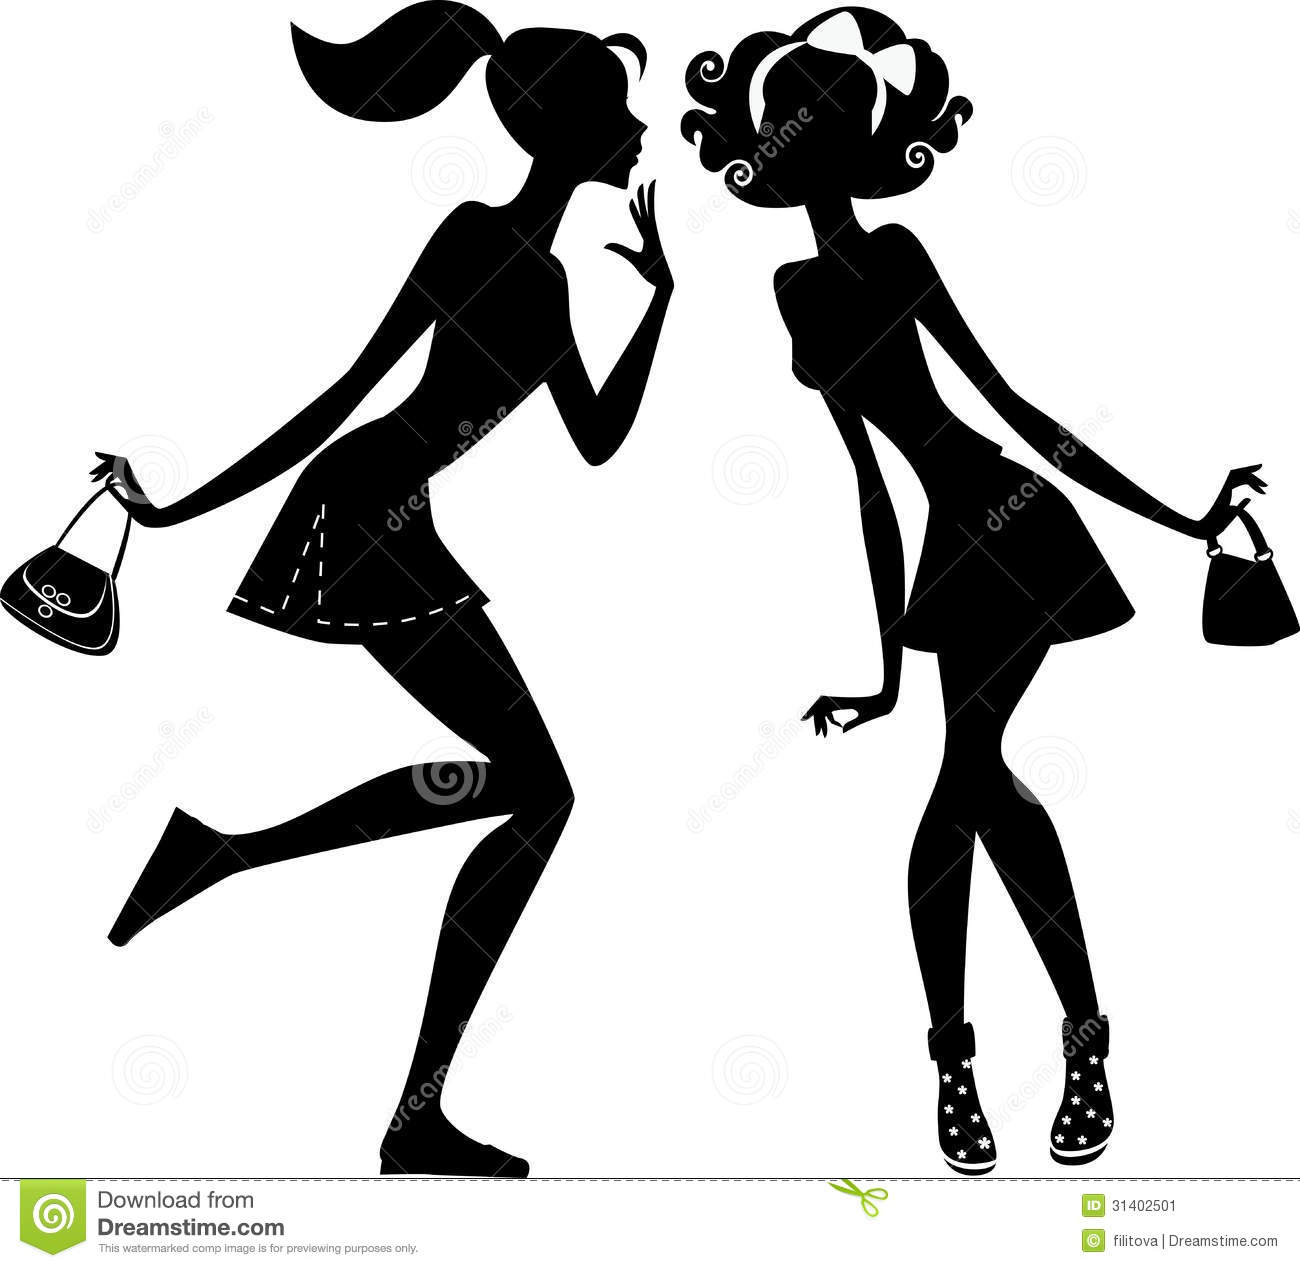 Two Girlfriends Talking Stock Image   Image  31402501